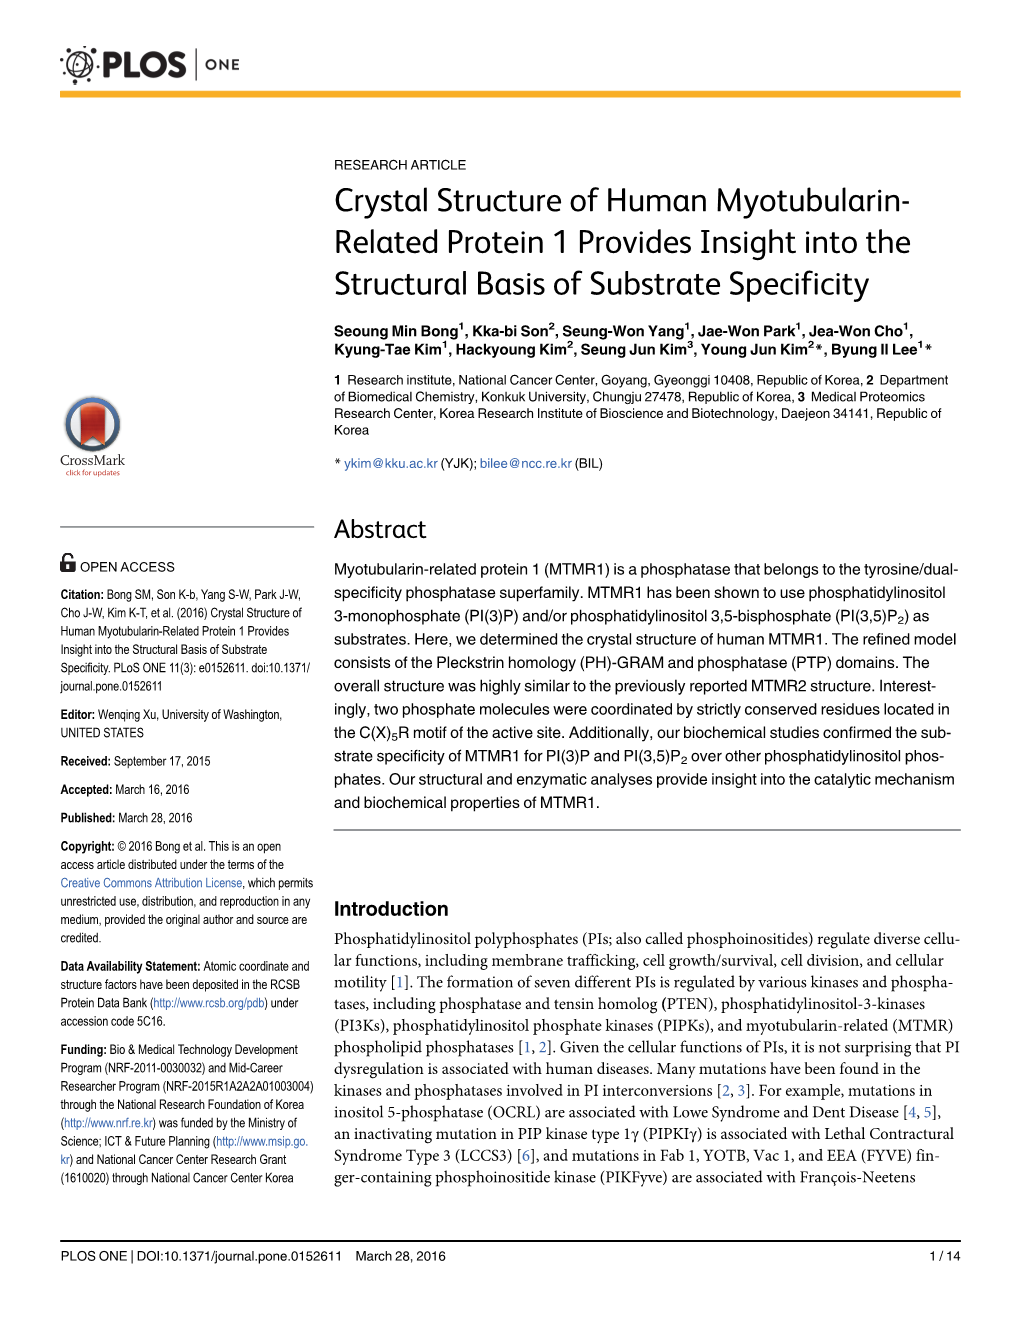 Crystal Structure of Human Myotubularin-Related Protein 1